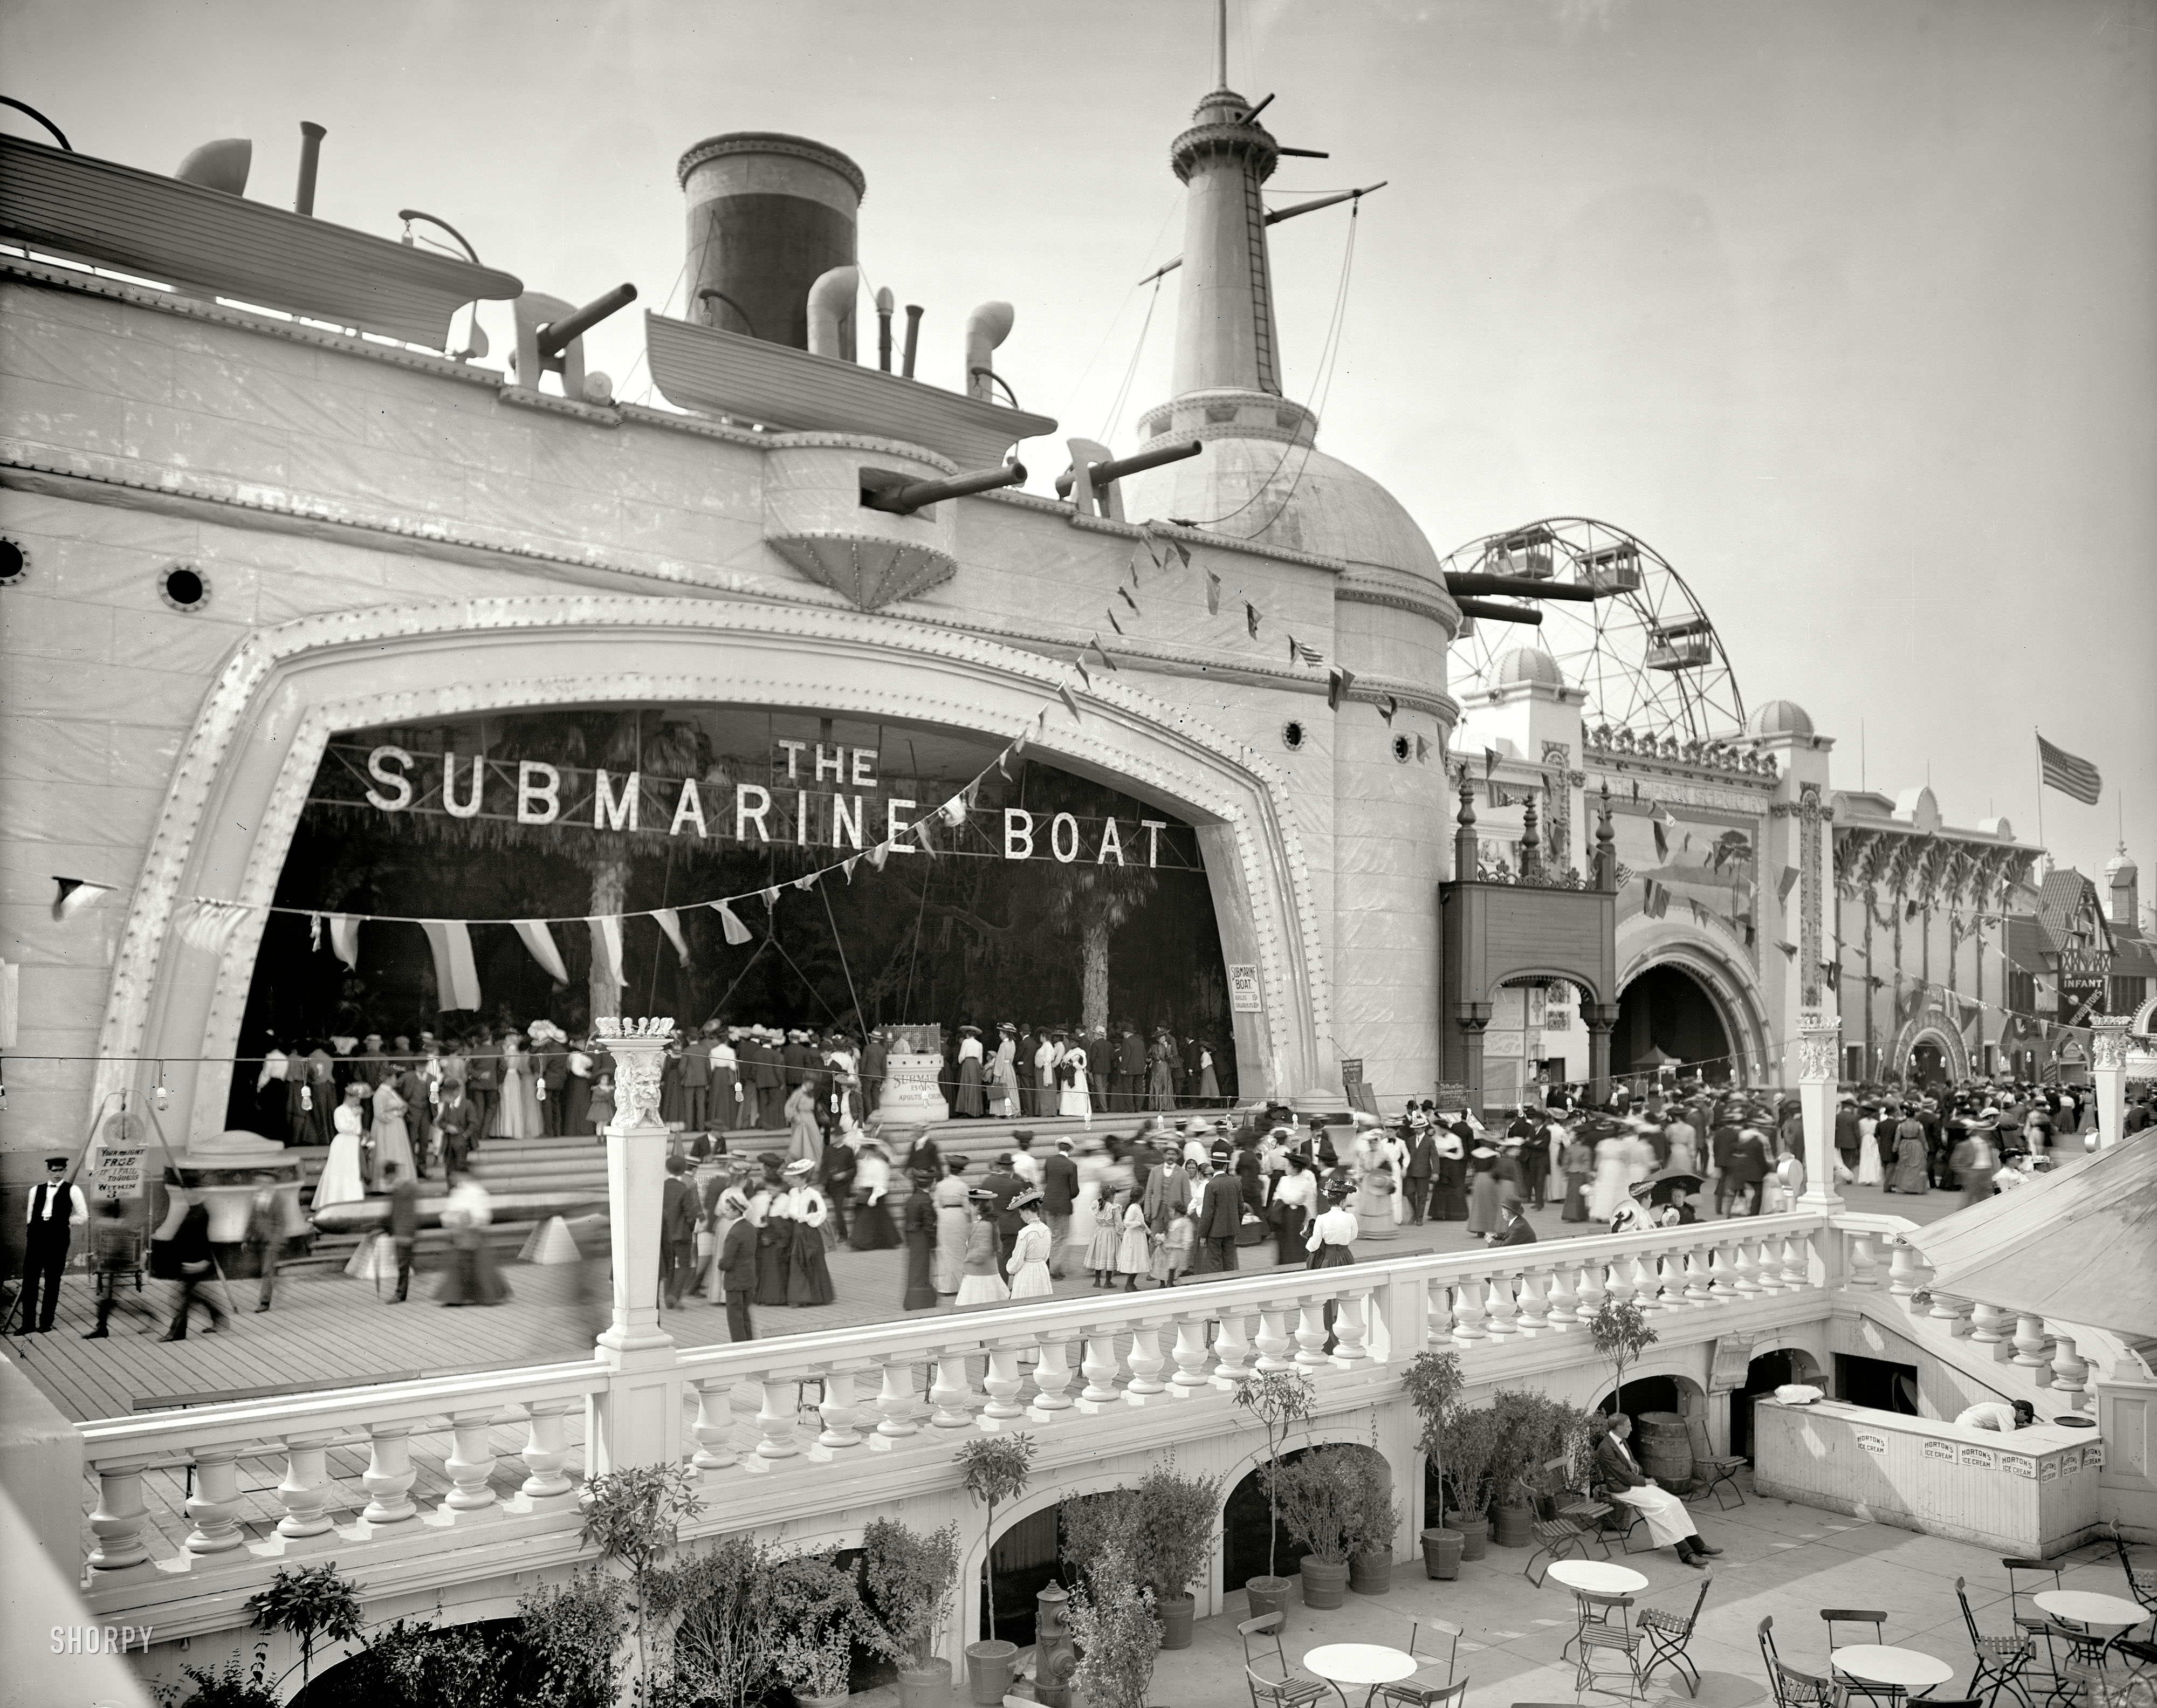 New York circa 1904. "The Submarine Boat, Coney Island." 8x10 inch dry plate glass negative, Detroit Publishing Company. View full size.